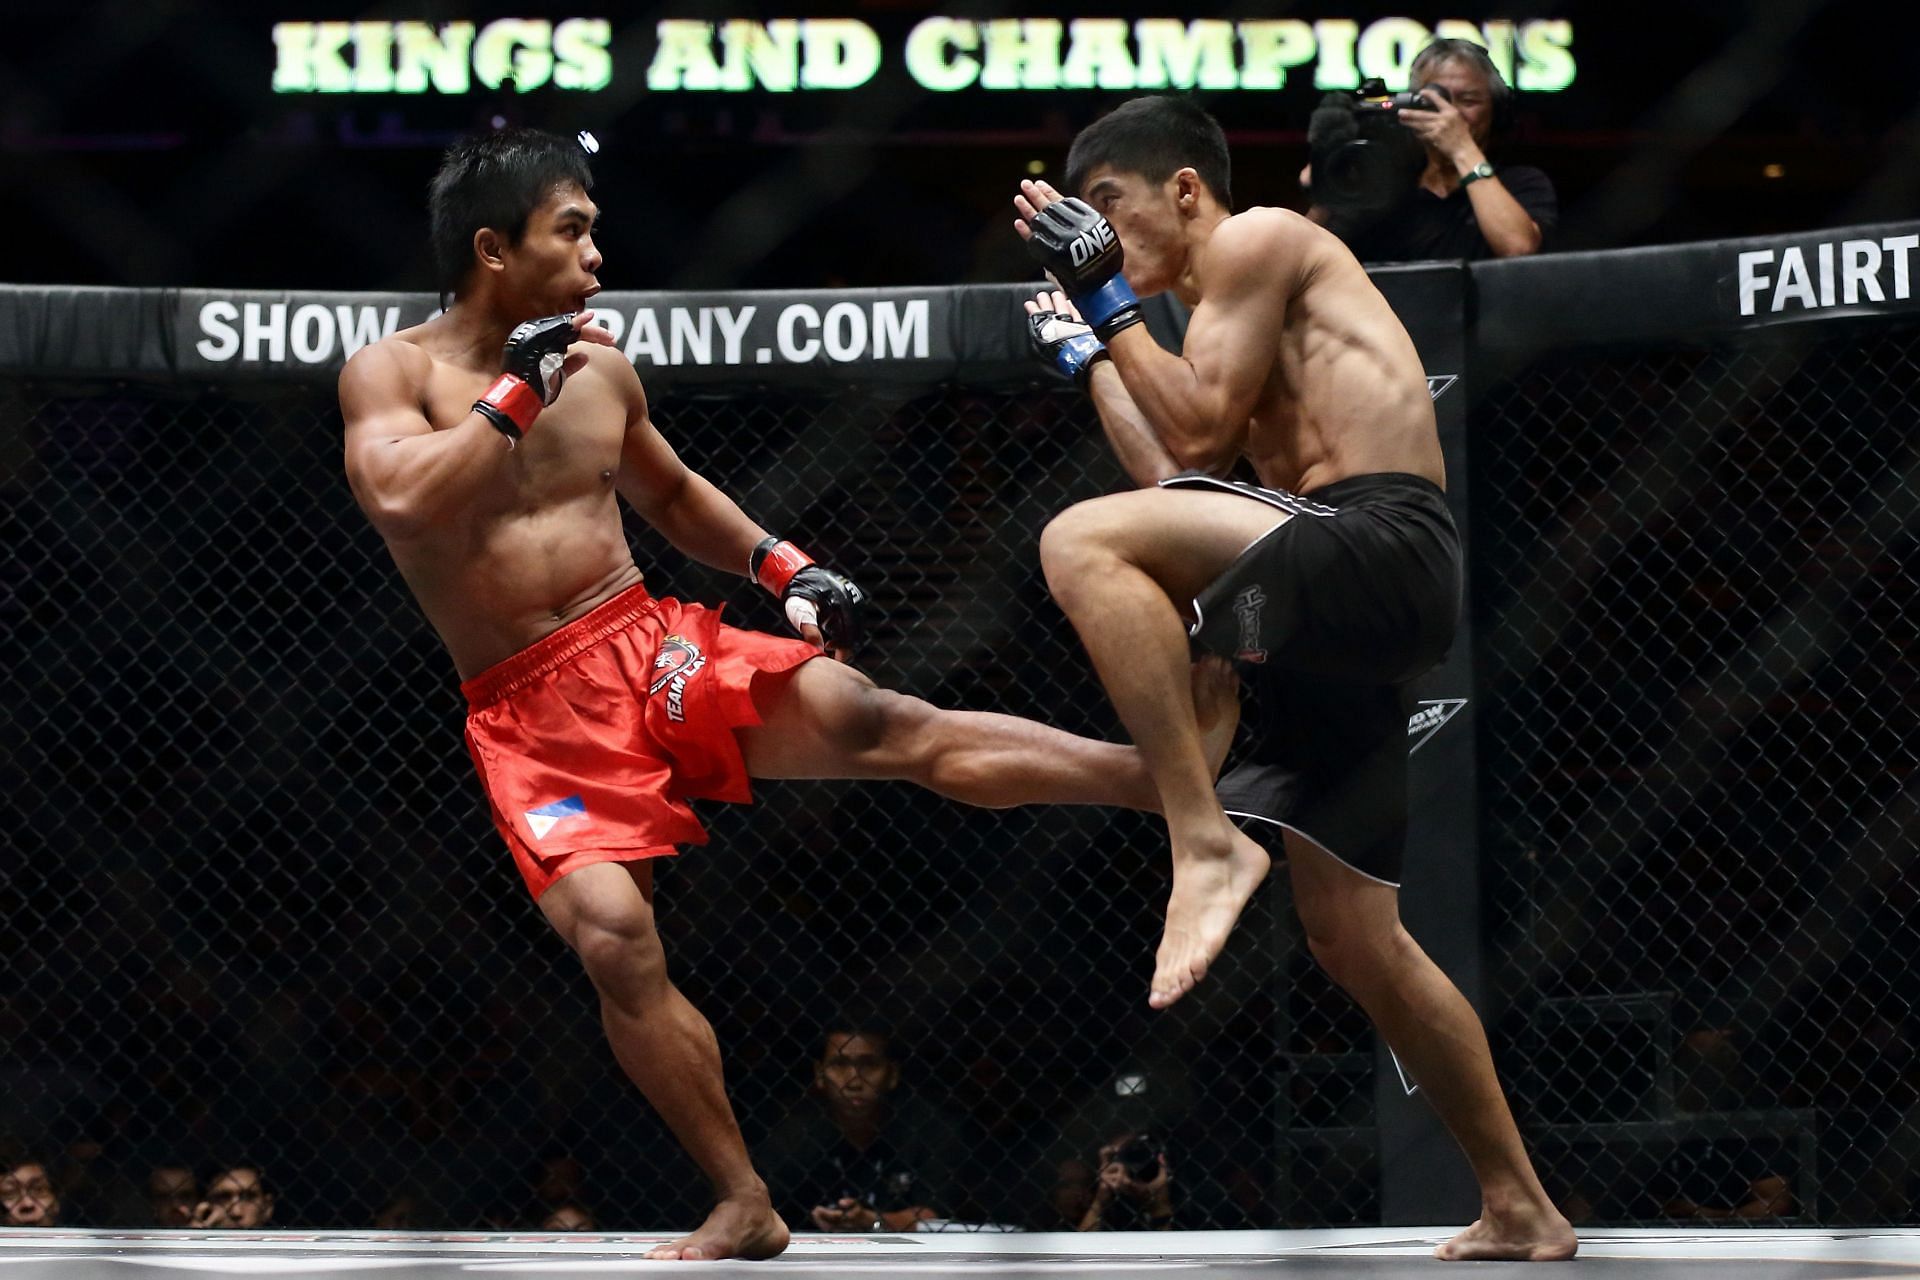 Kevin Belingon (left) hopes to end losing skid and earn another shot at the ONE bantamweight championship